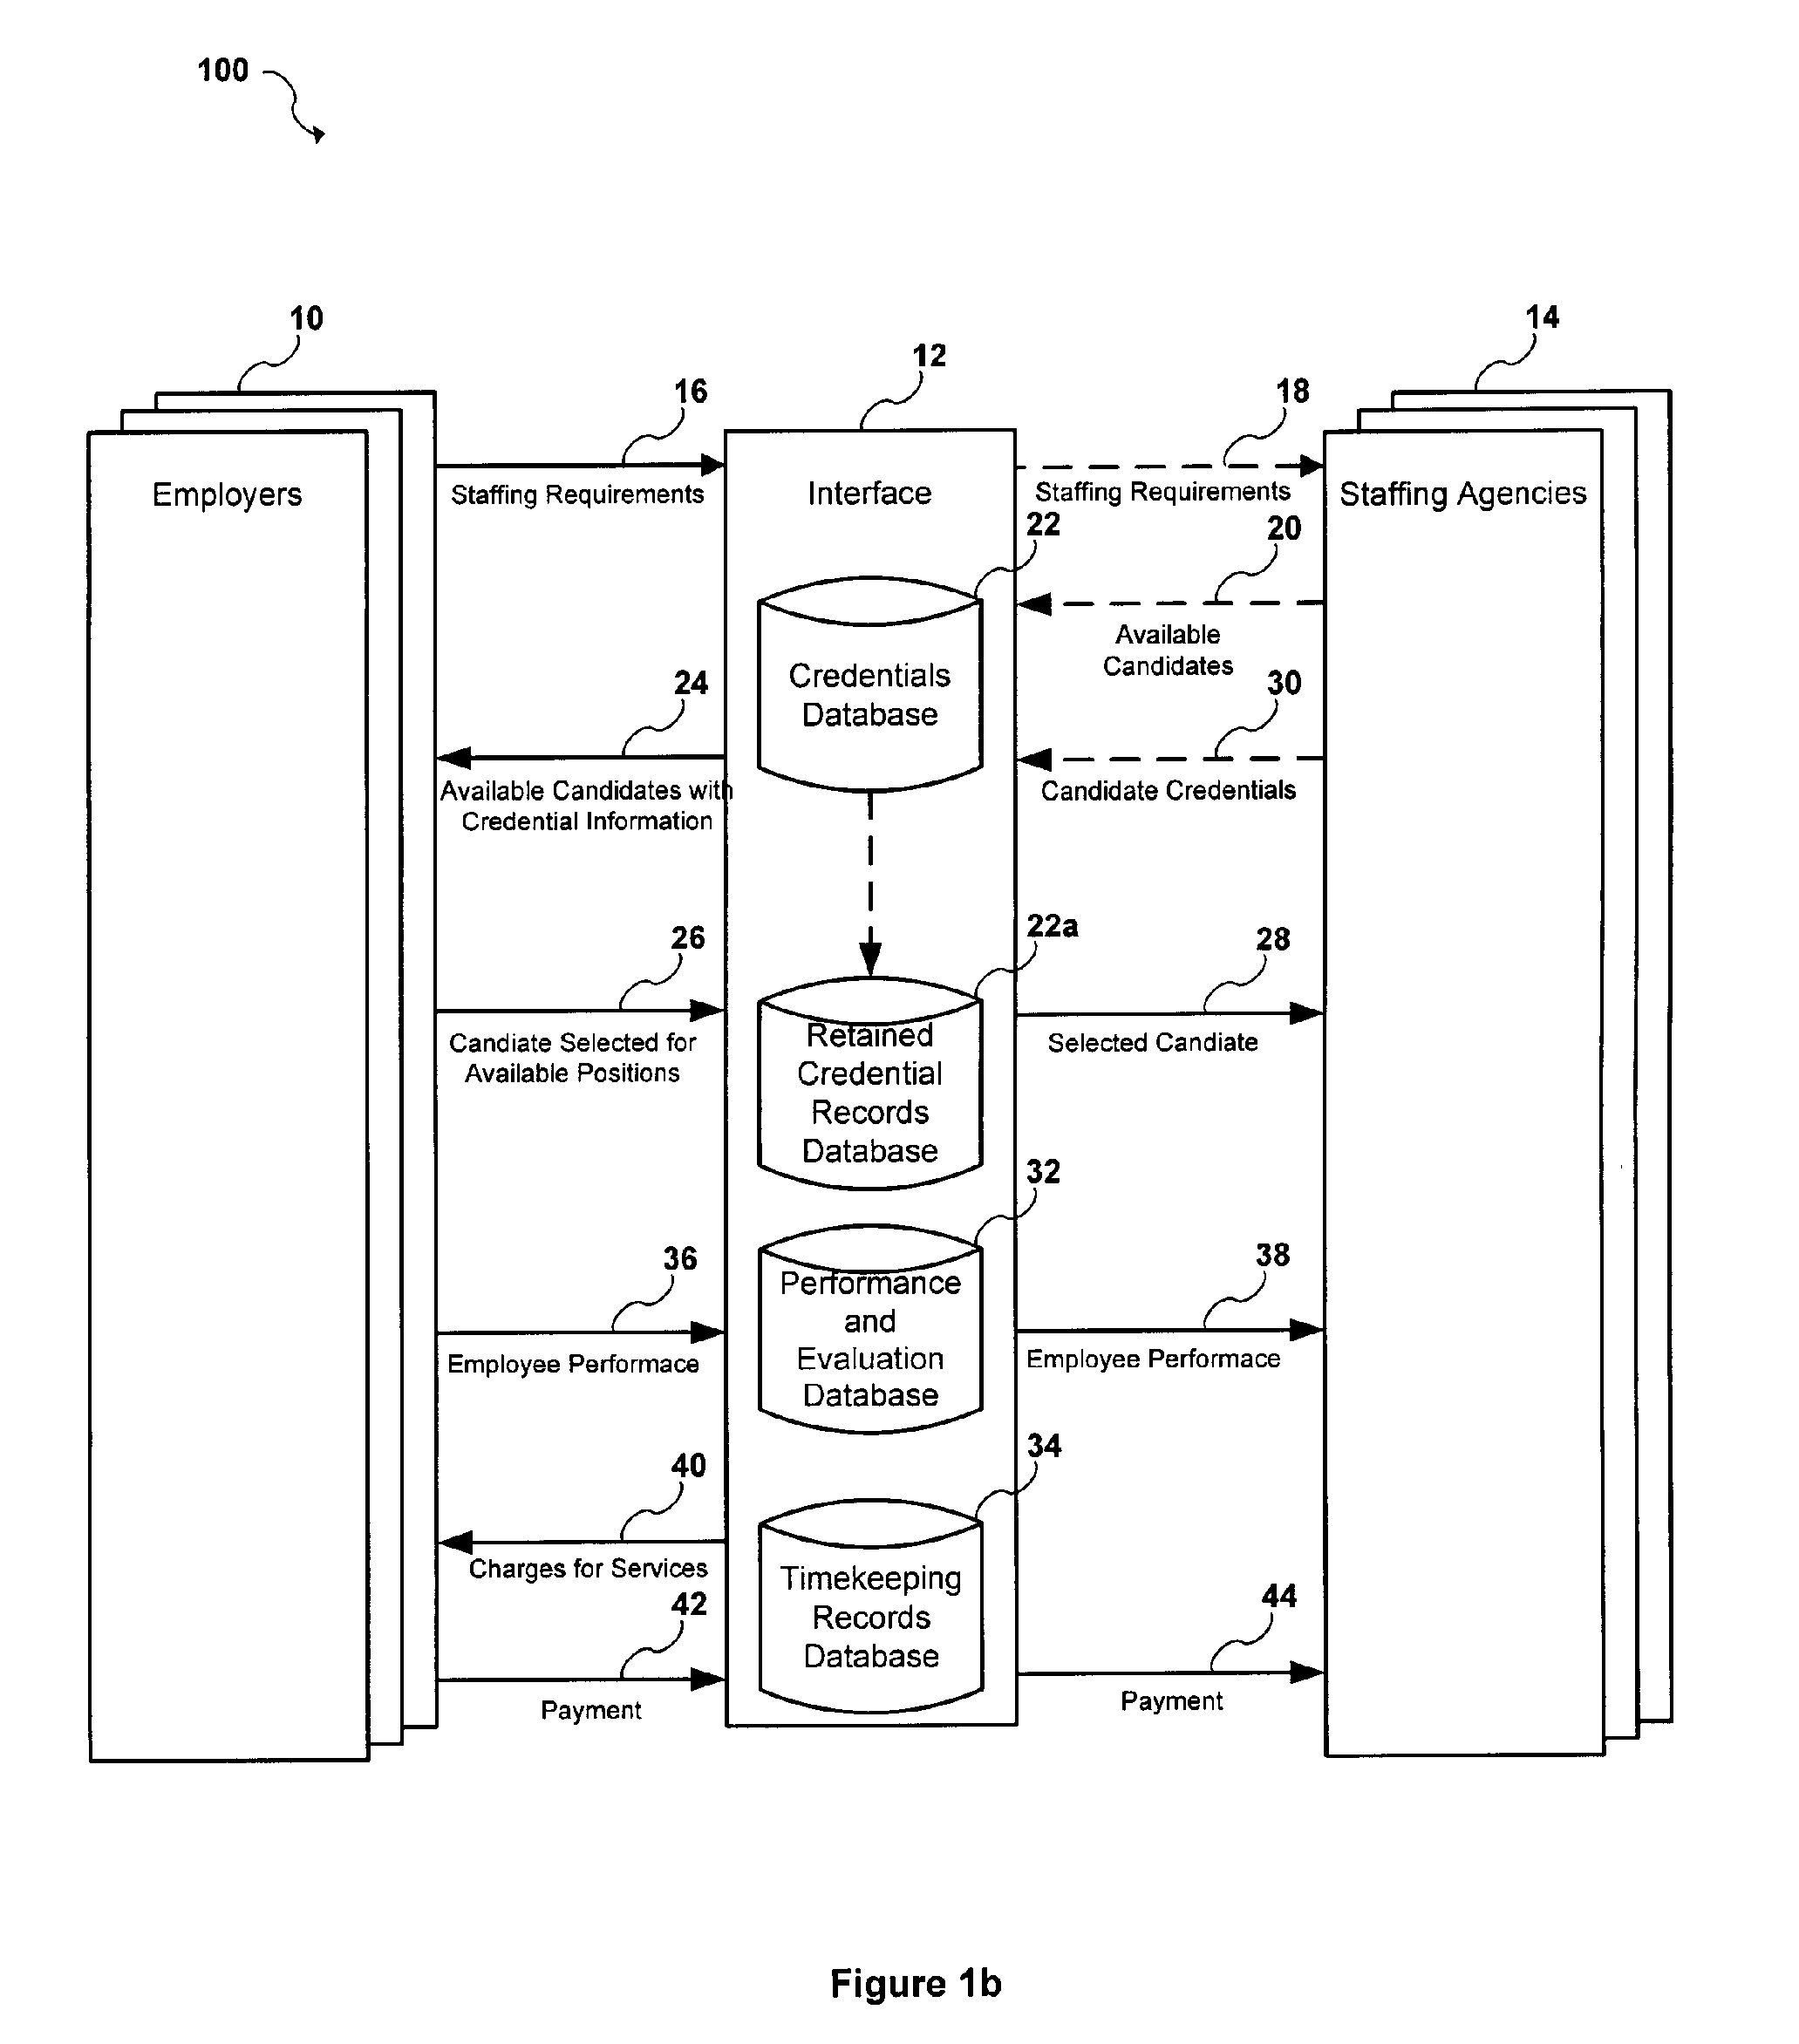 Method and system for enhanced efficiency in meeting staffing requirements